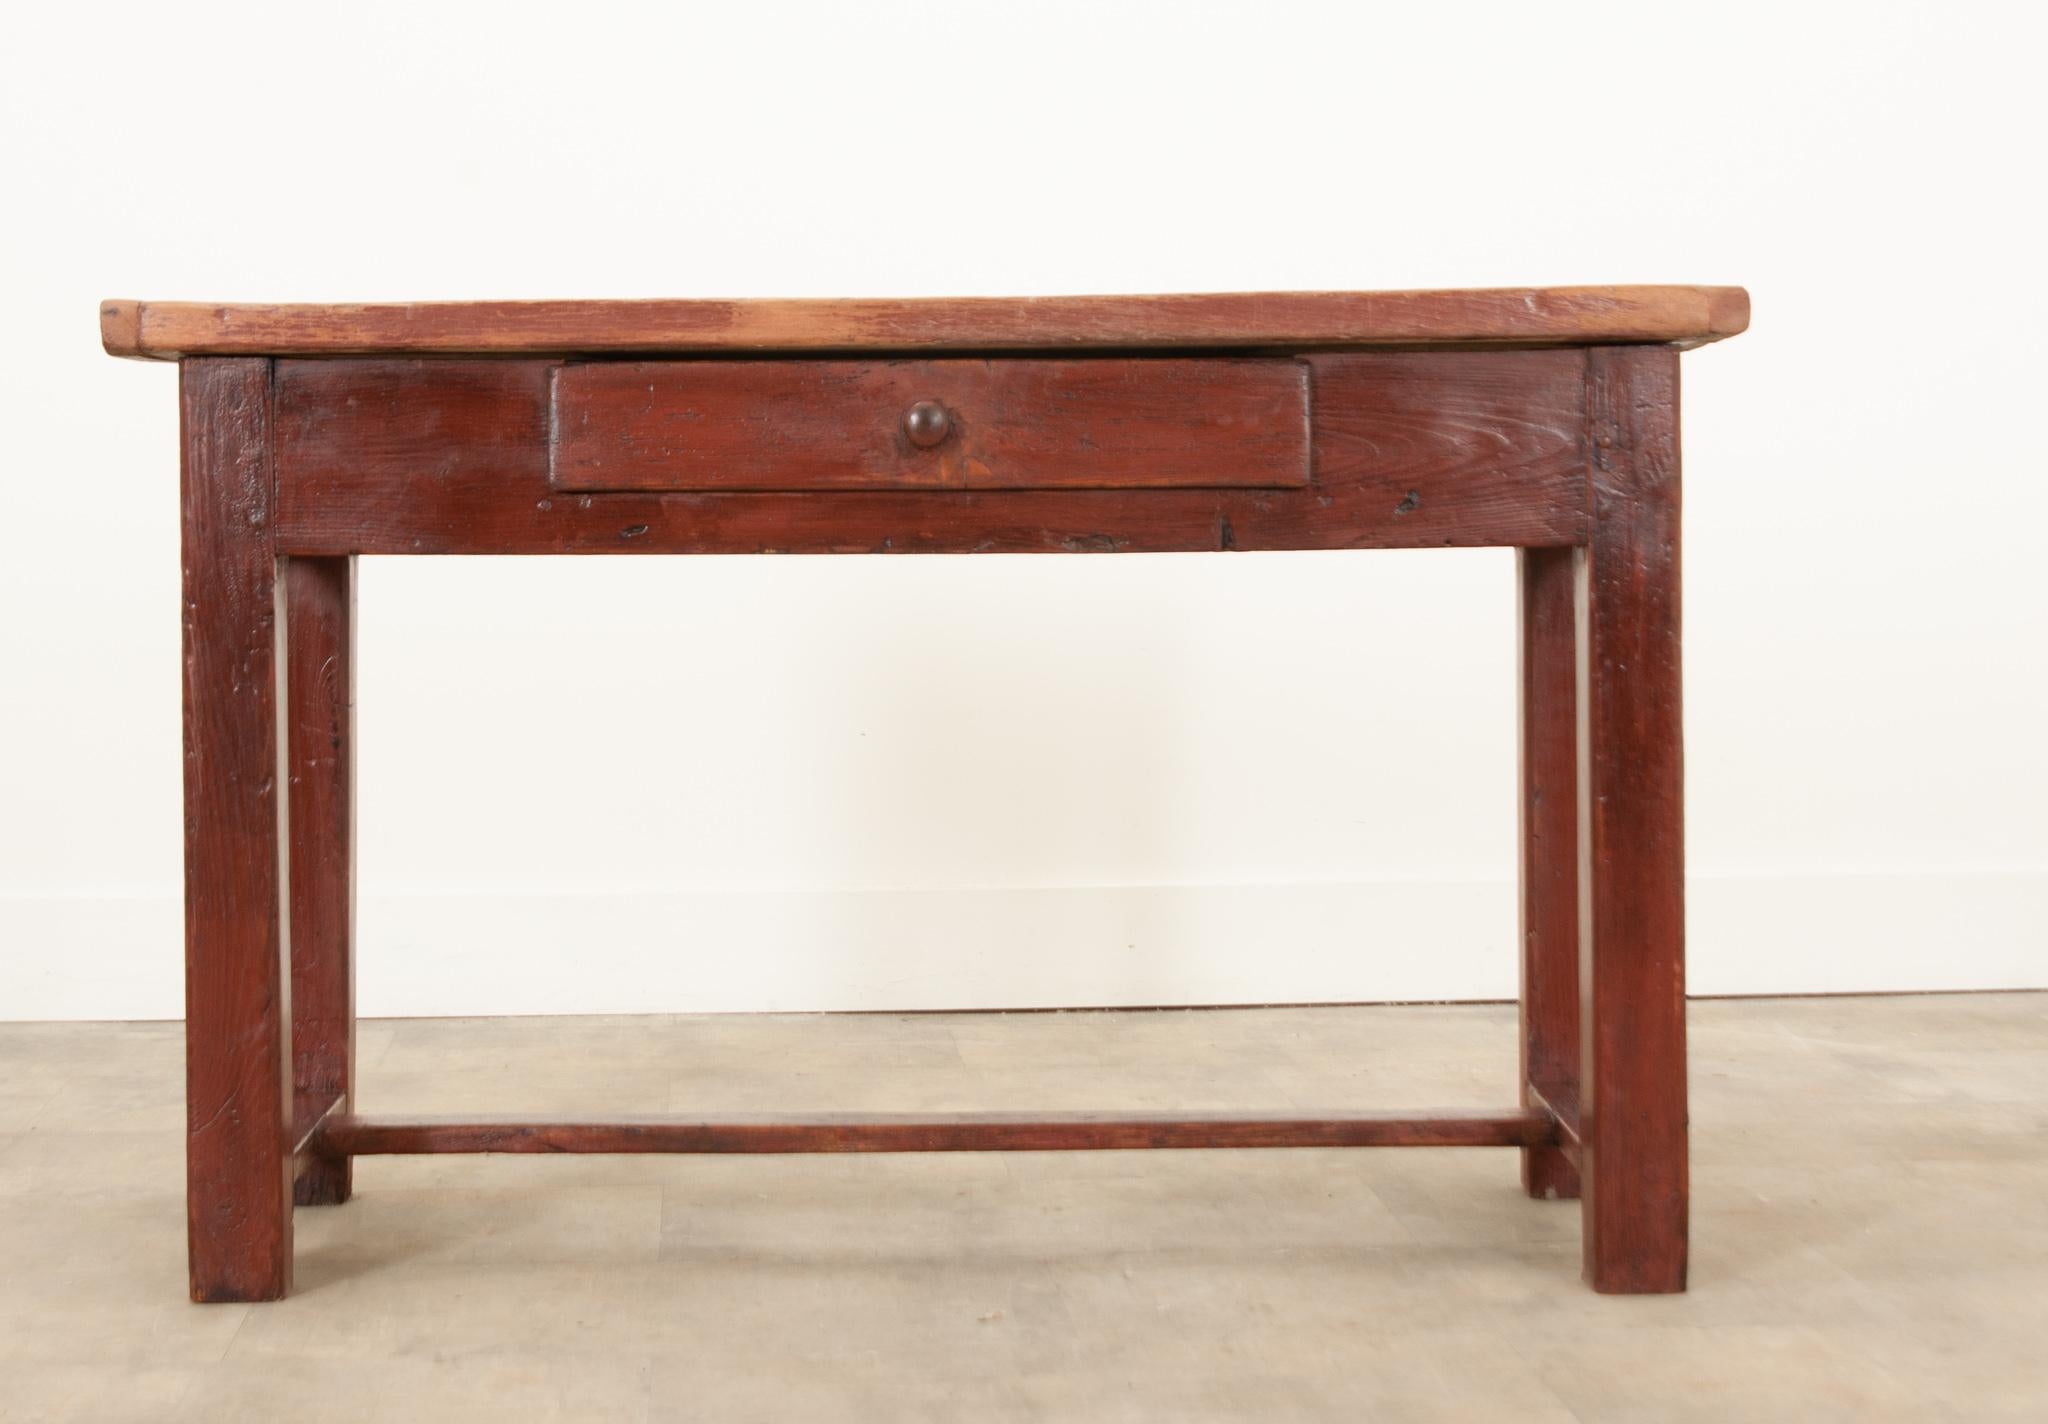 This simple console was hand-crafted of solid pine in 19th century England. The rusticated pine top has incredible texture, a rich patina, and is a beautiful natural color. The apron houses a single wide drawer that opens easily with a simply turned